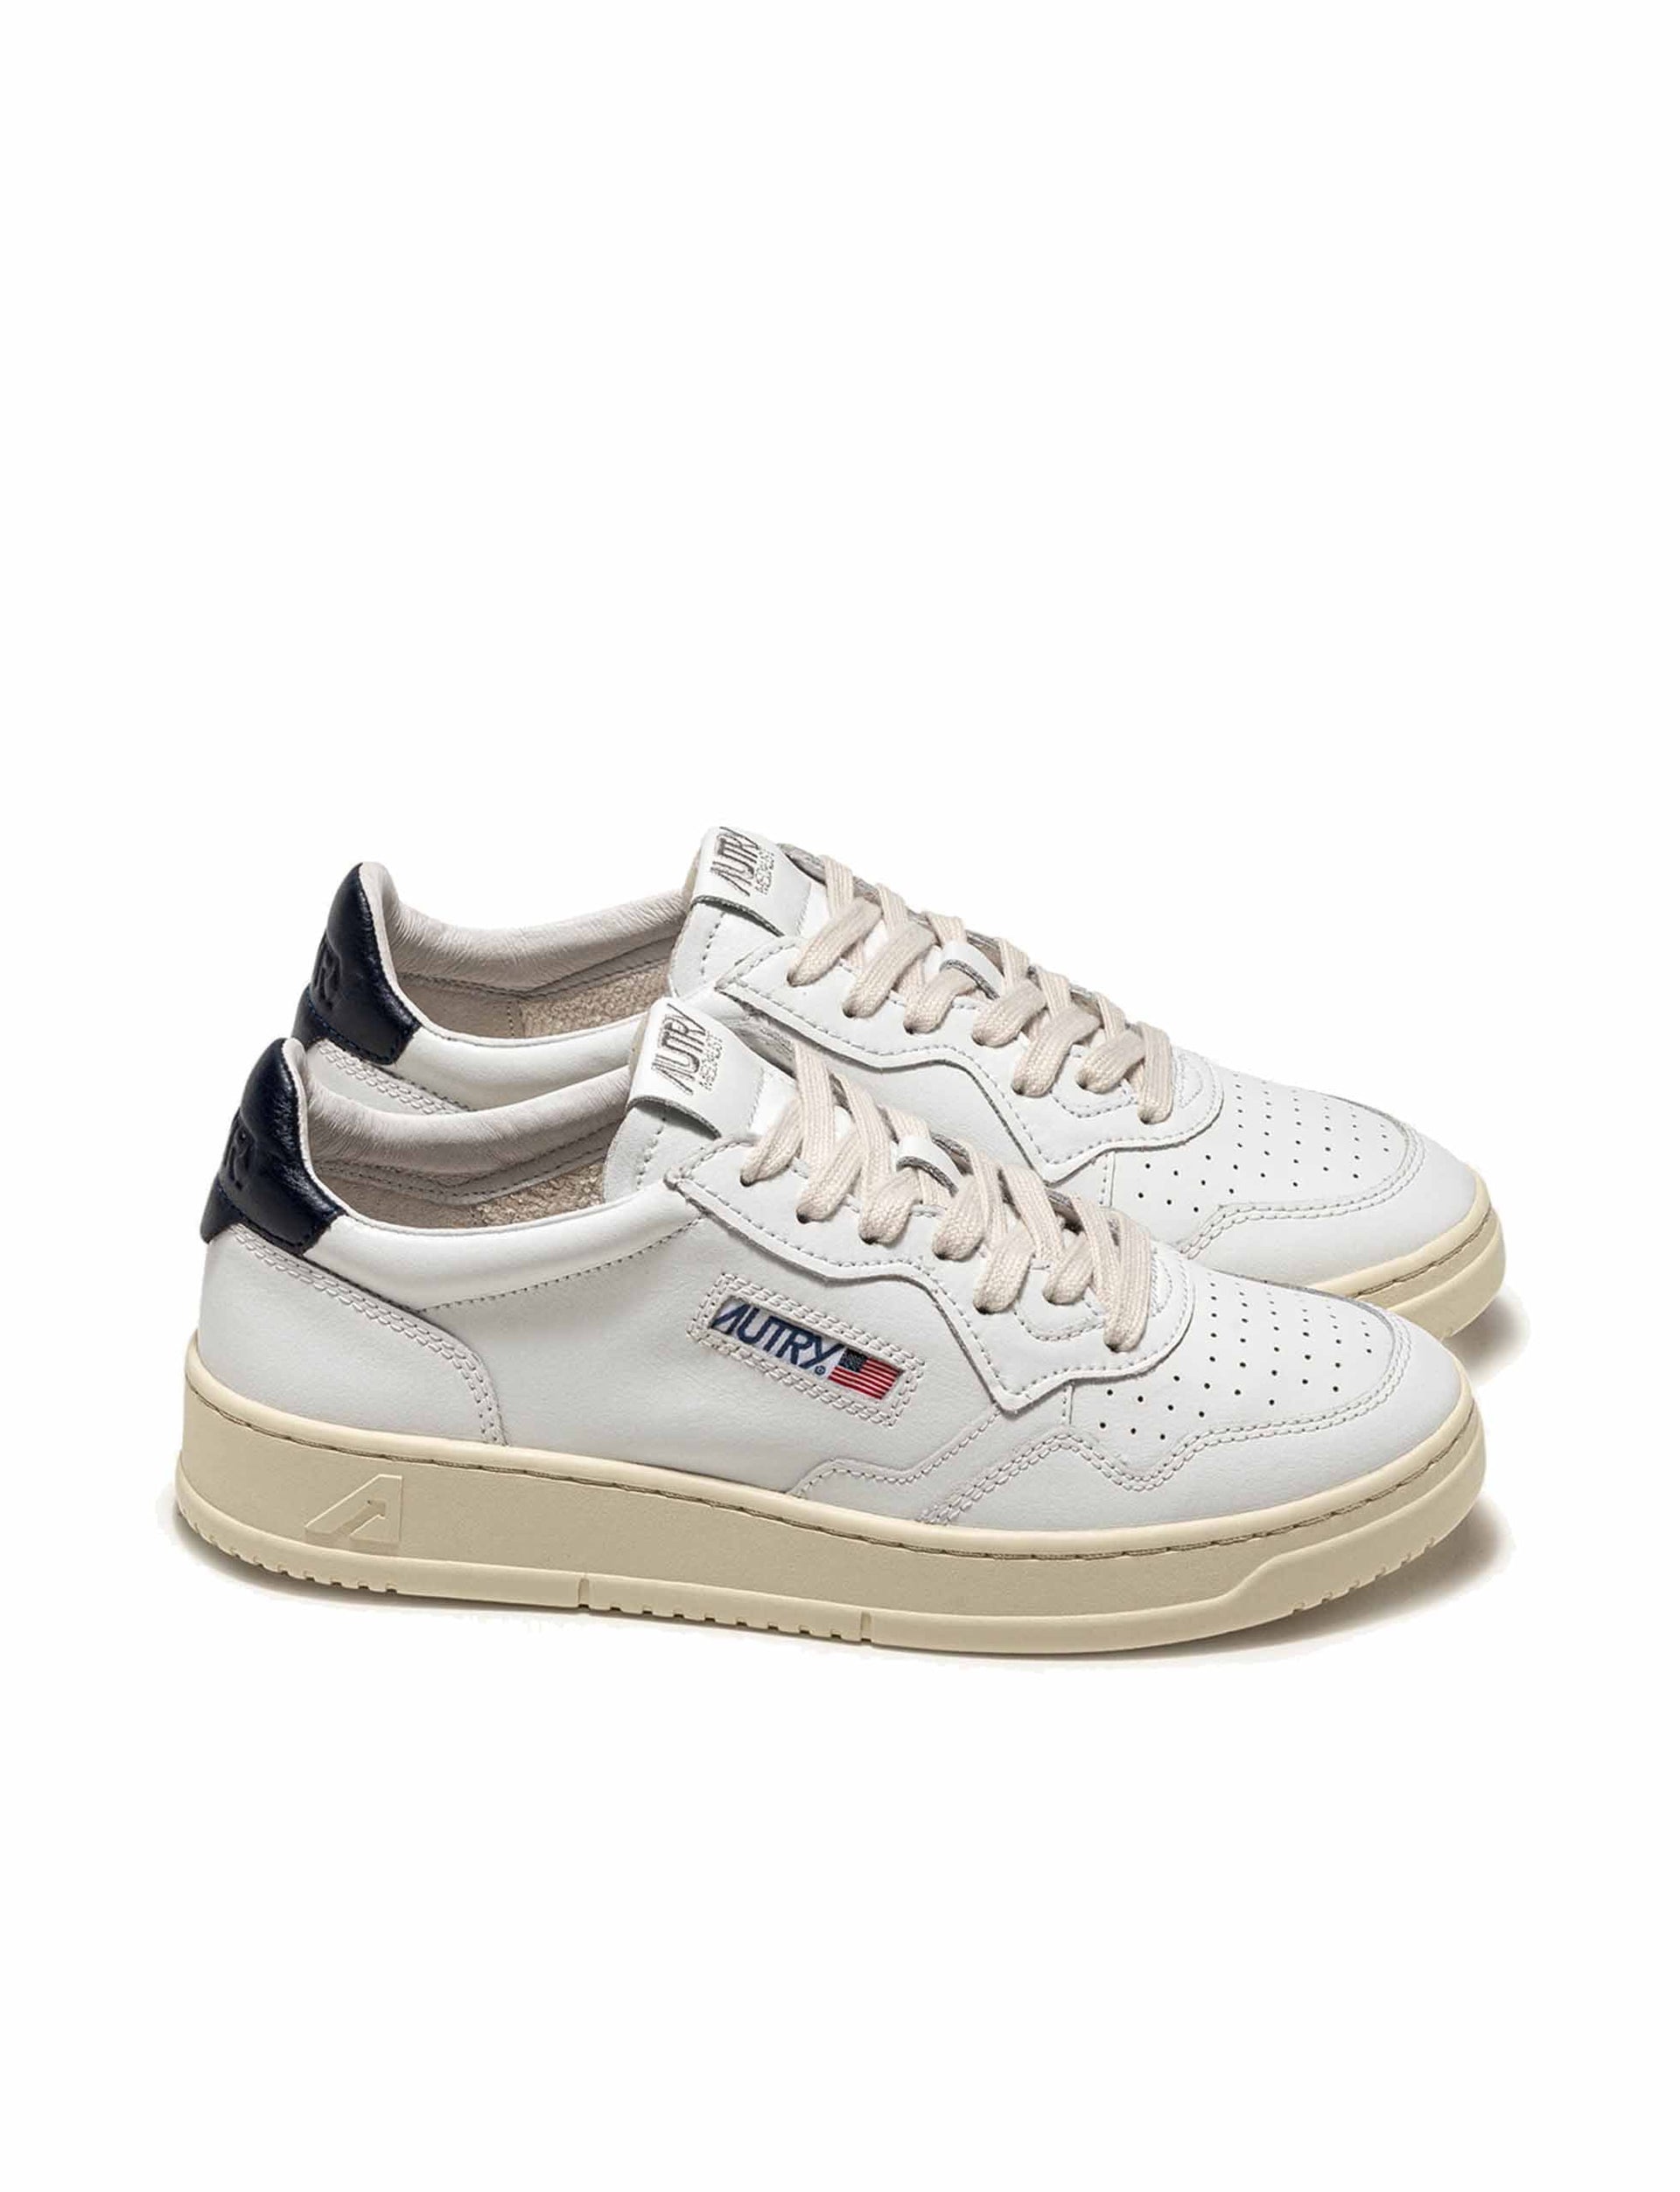 AUTRY SNEAKERS WOMAN MEDALIST LOW SNEAKERS IN LEATHER COLOR WHITE BLUE